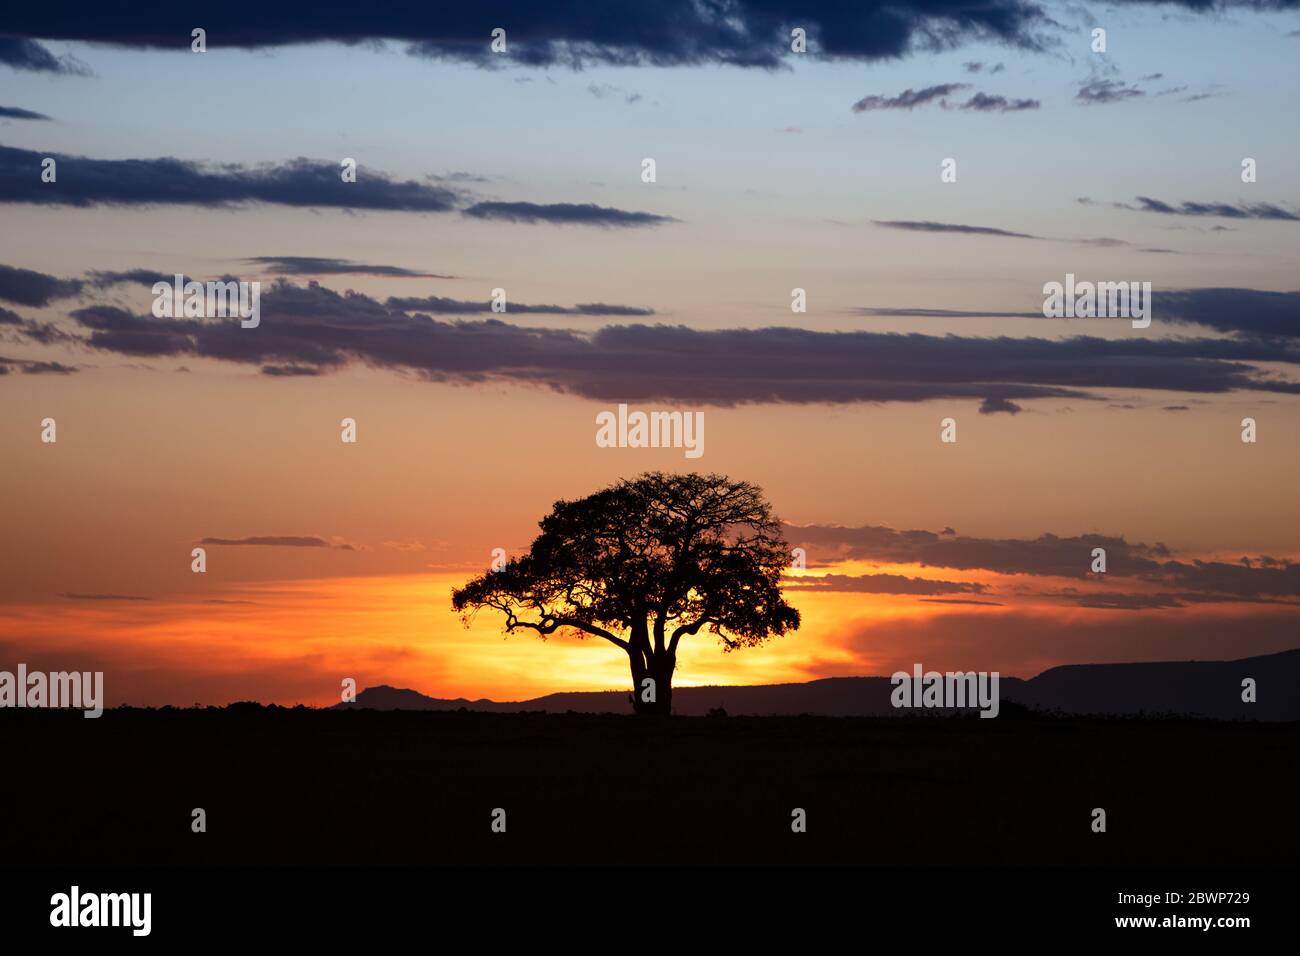 Golden sunrise behind Silhouette tree with beautiful wide open sky in Kenya, Africa Stock Photo